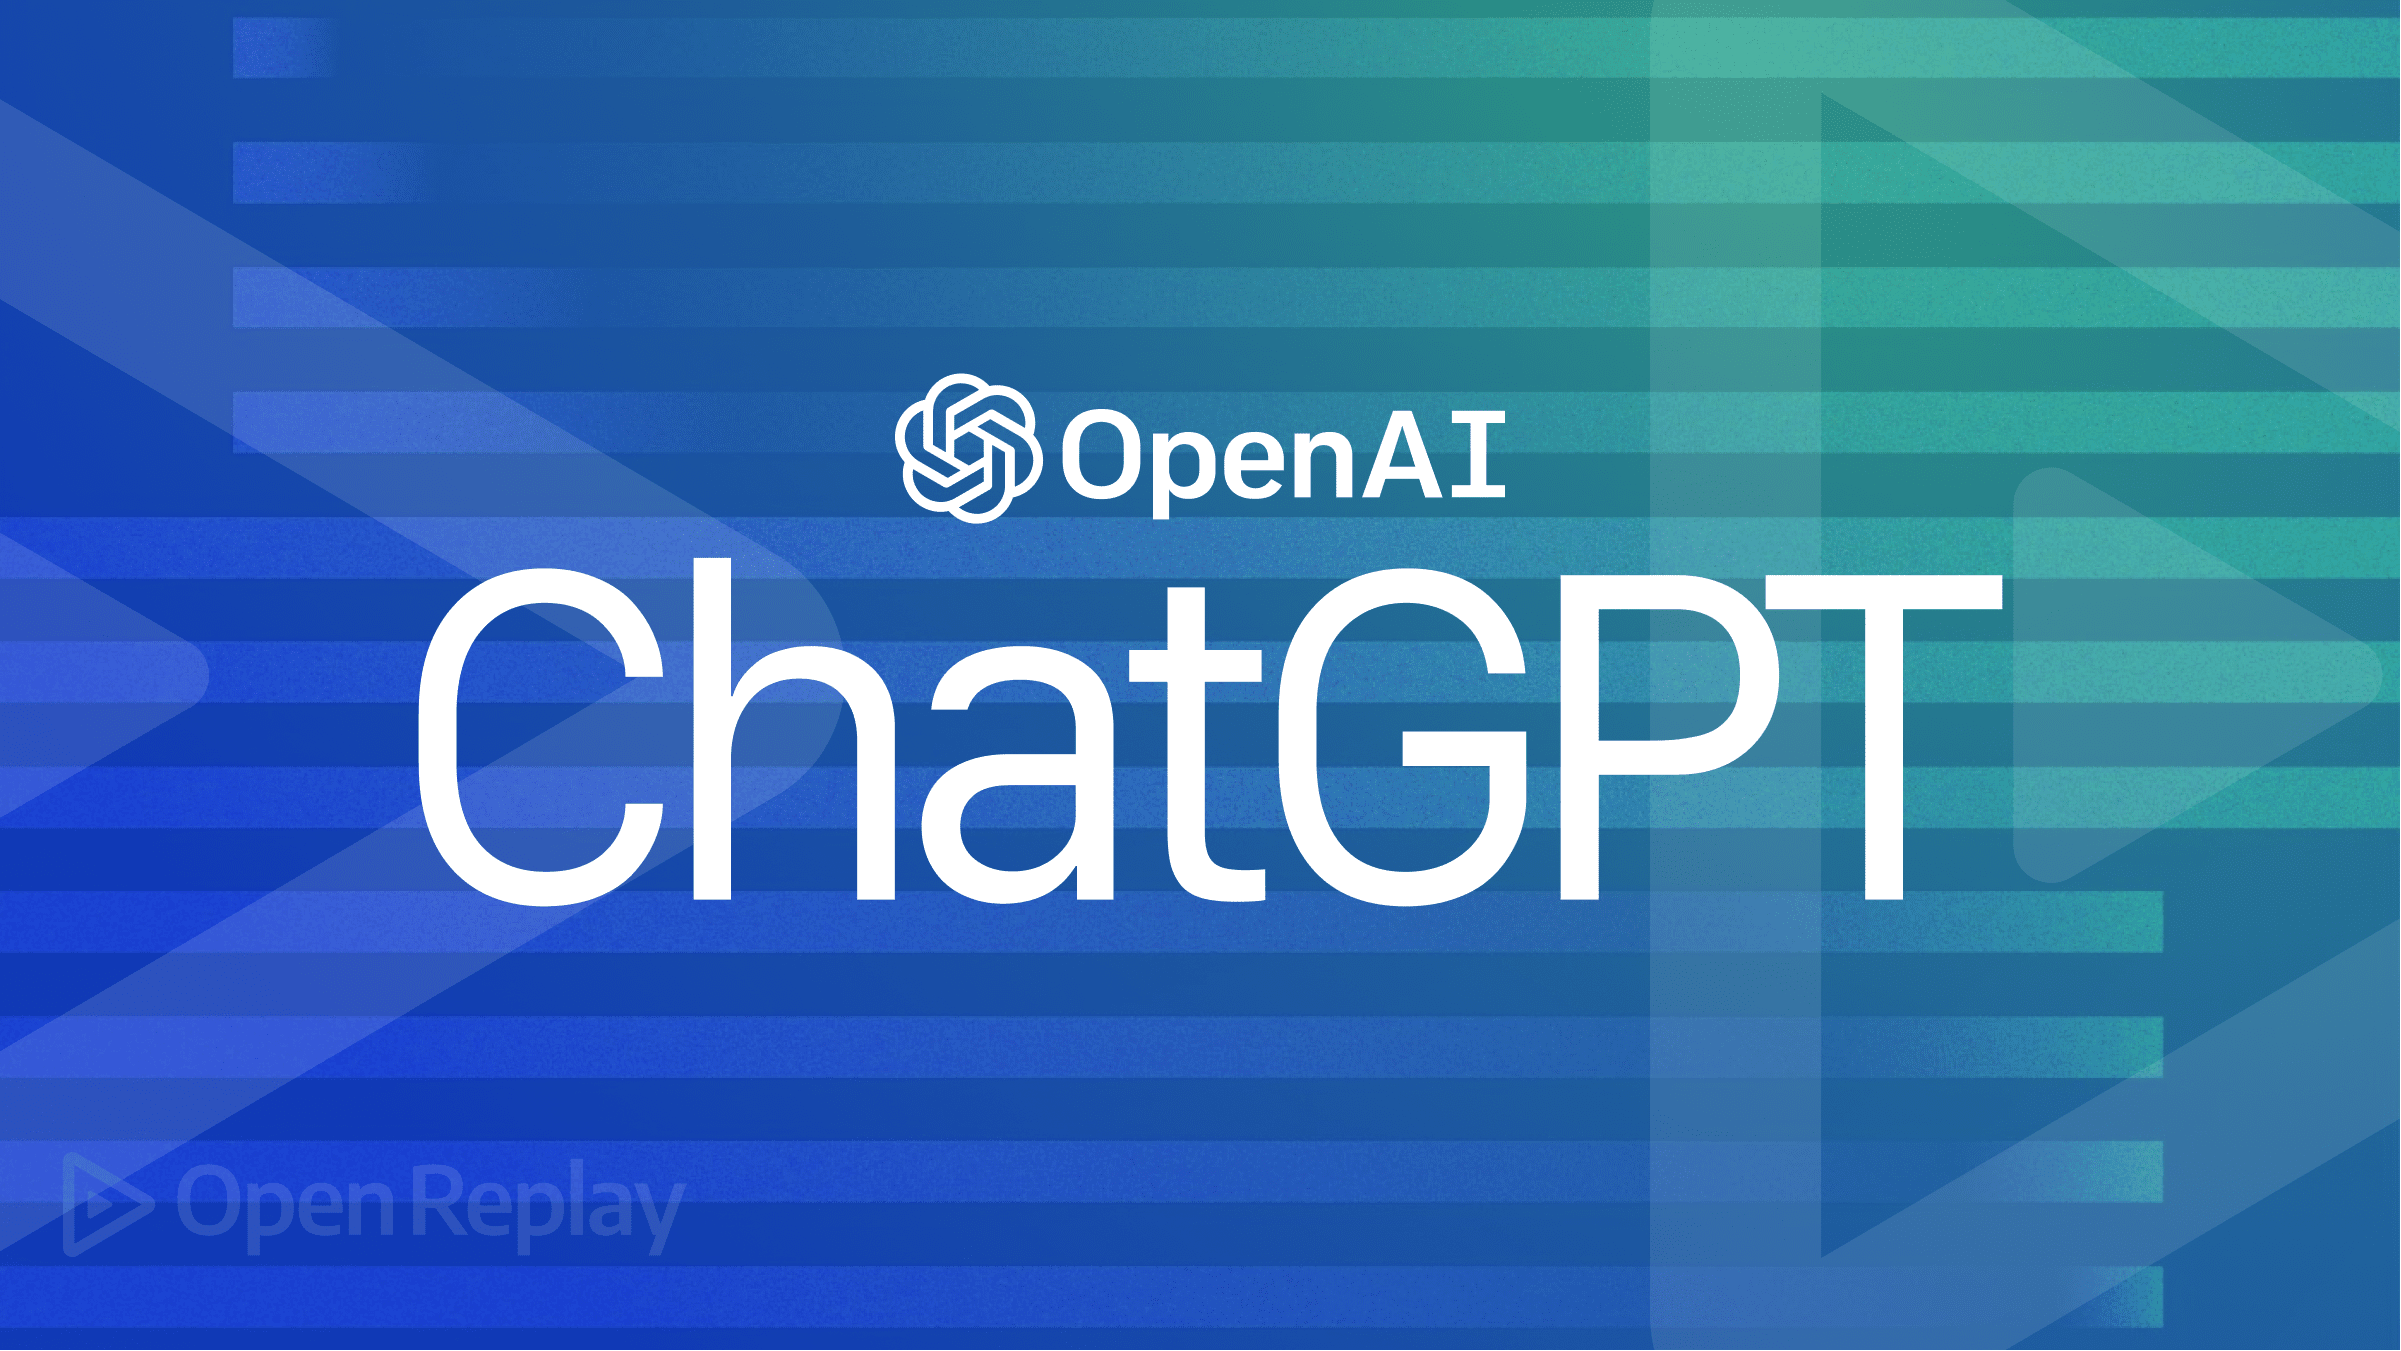 Just What Could ChatGPT Disrupt?